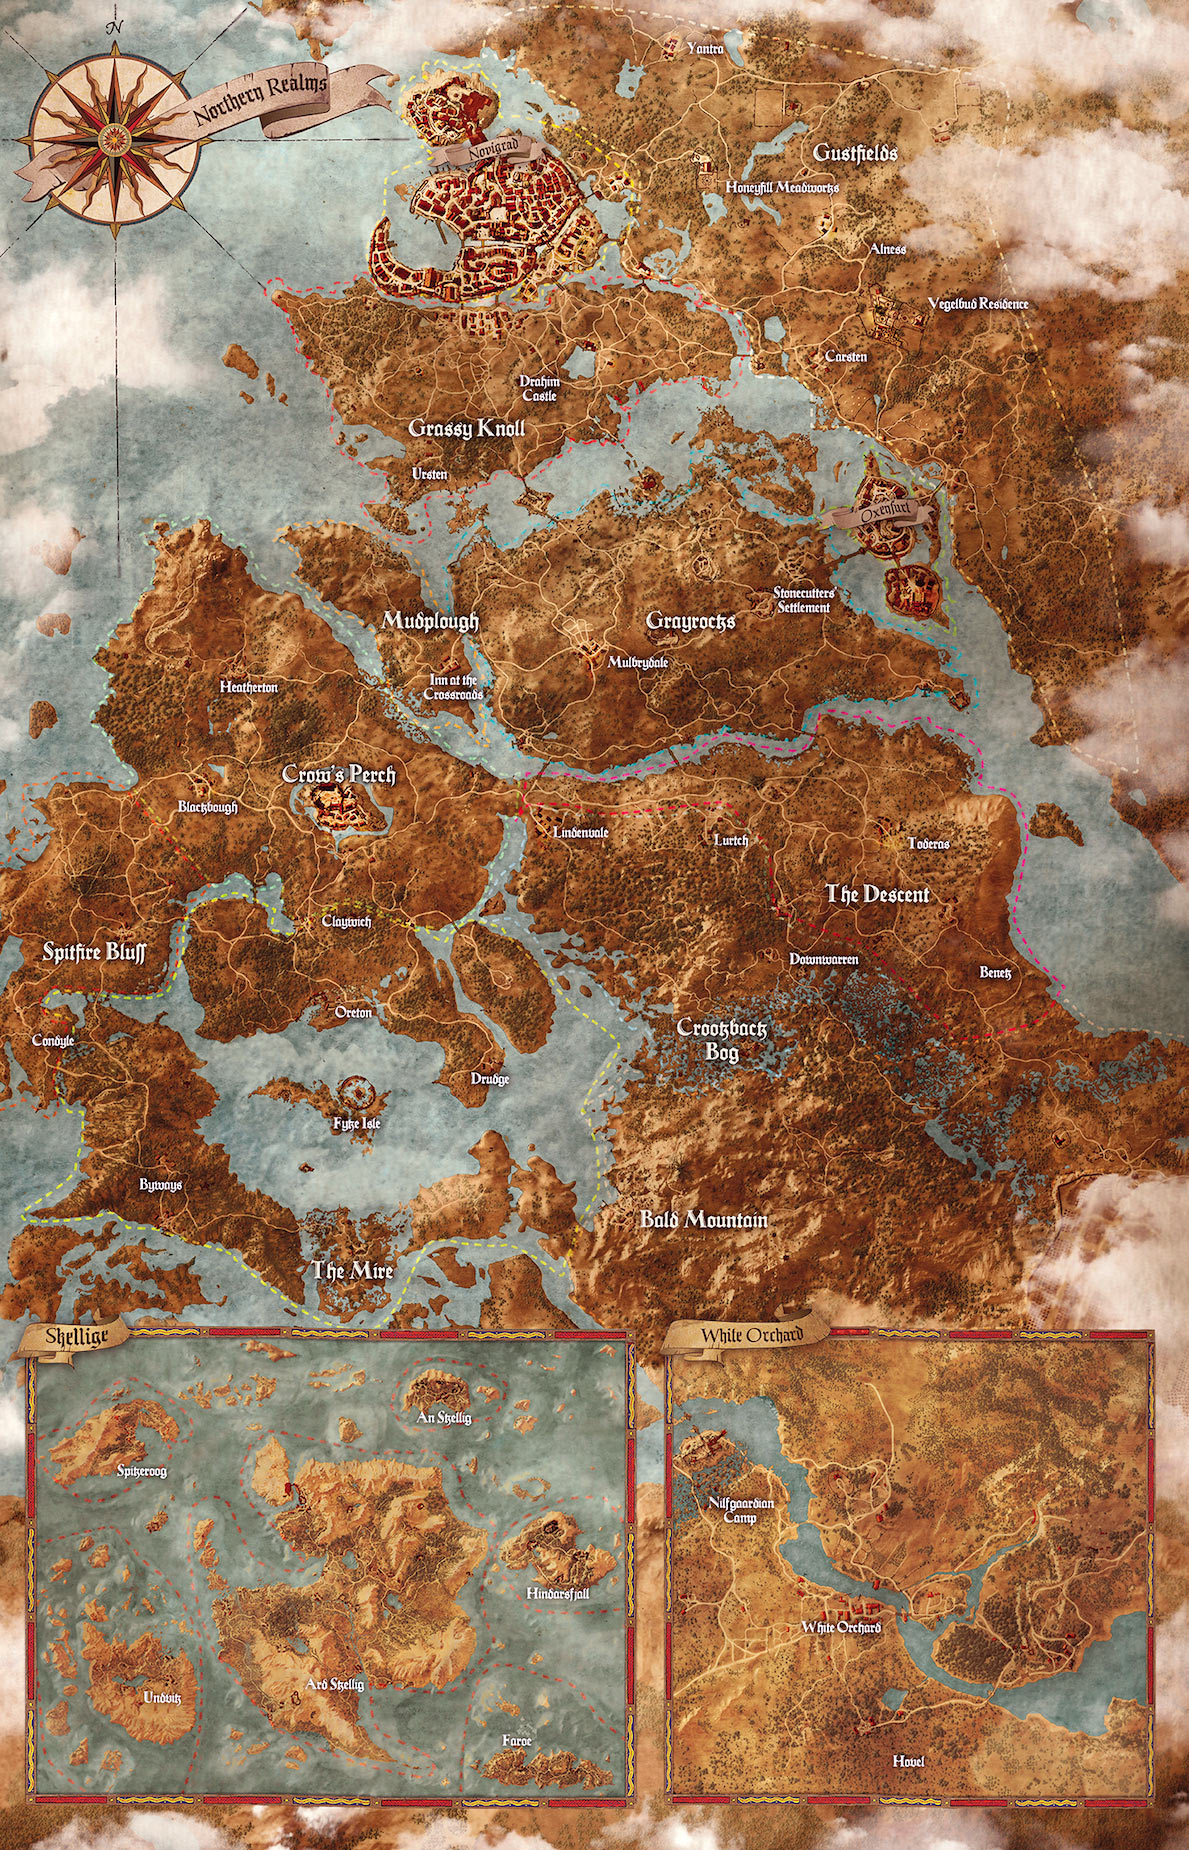 Painted map for The Witcher 3: Wild Hunt